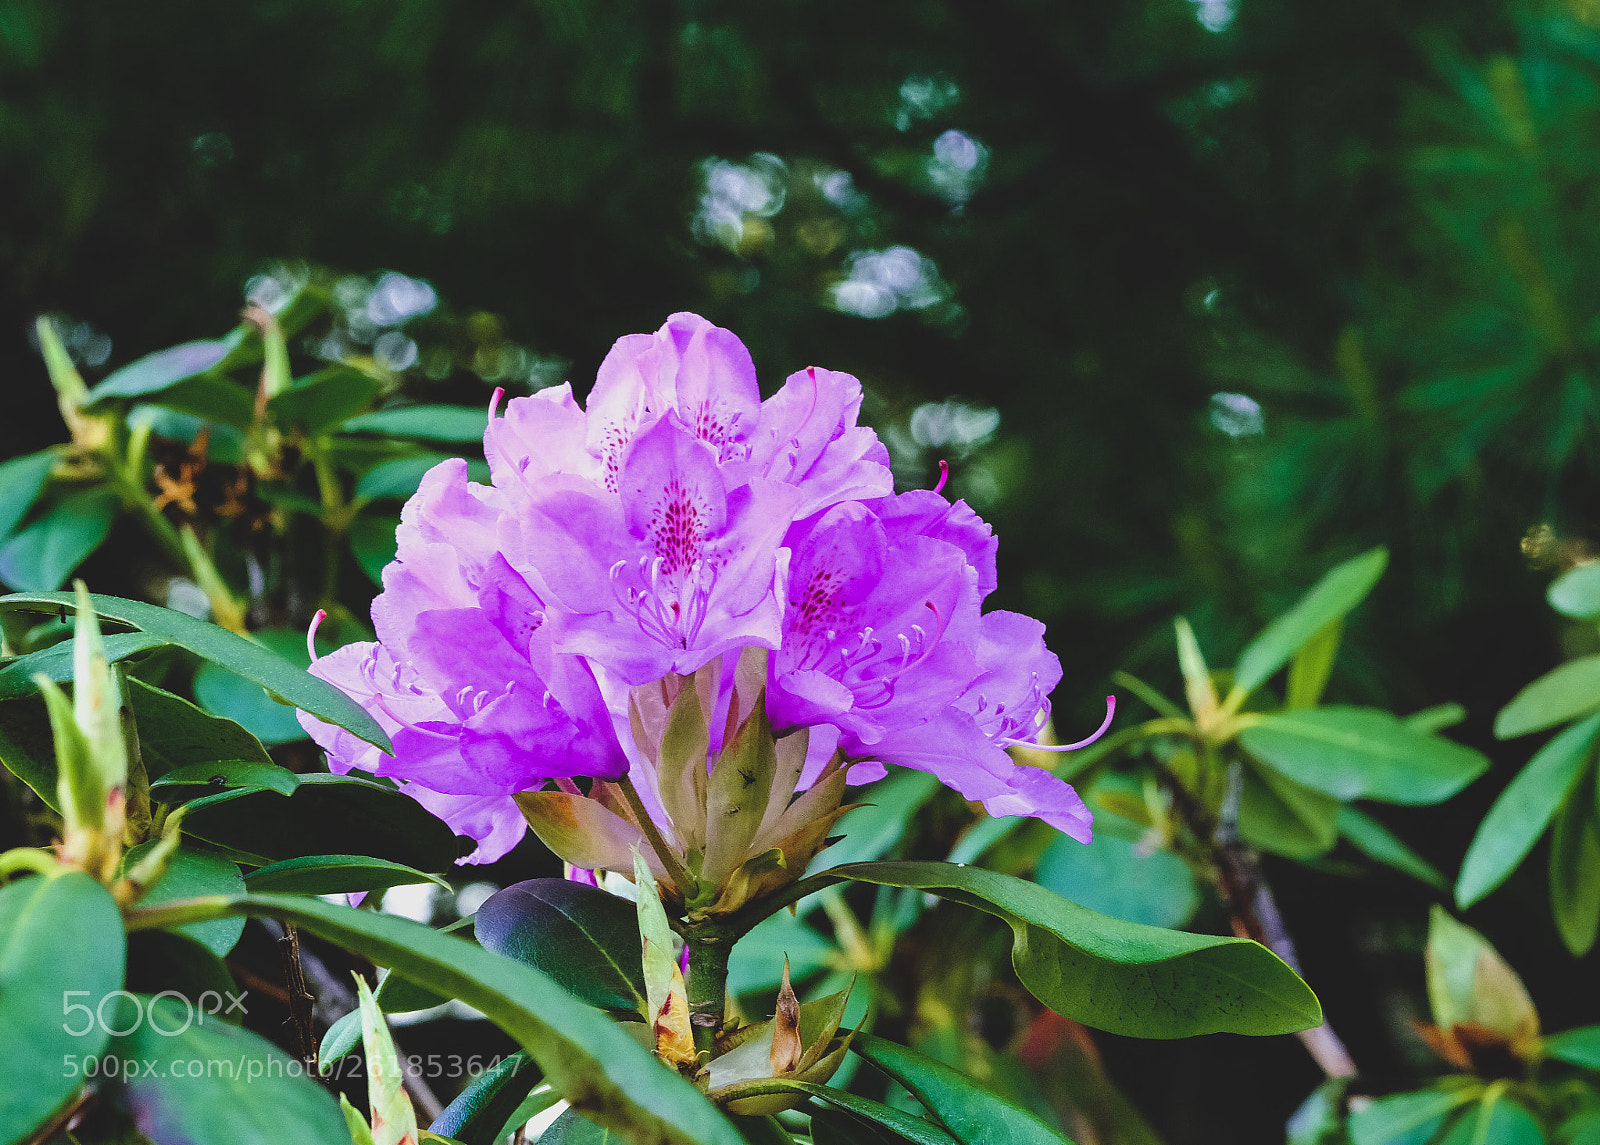 Fujifilm X-E3 sample photo. First of the 2018 rhododendrons photography